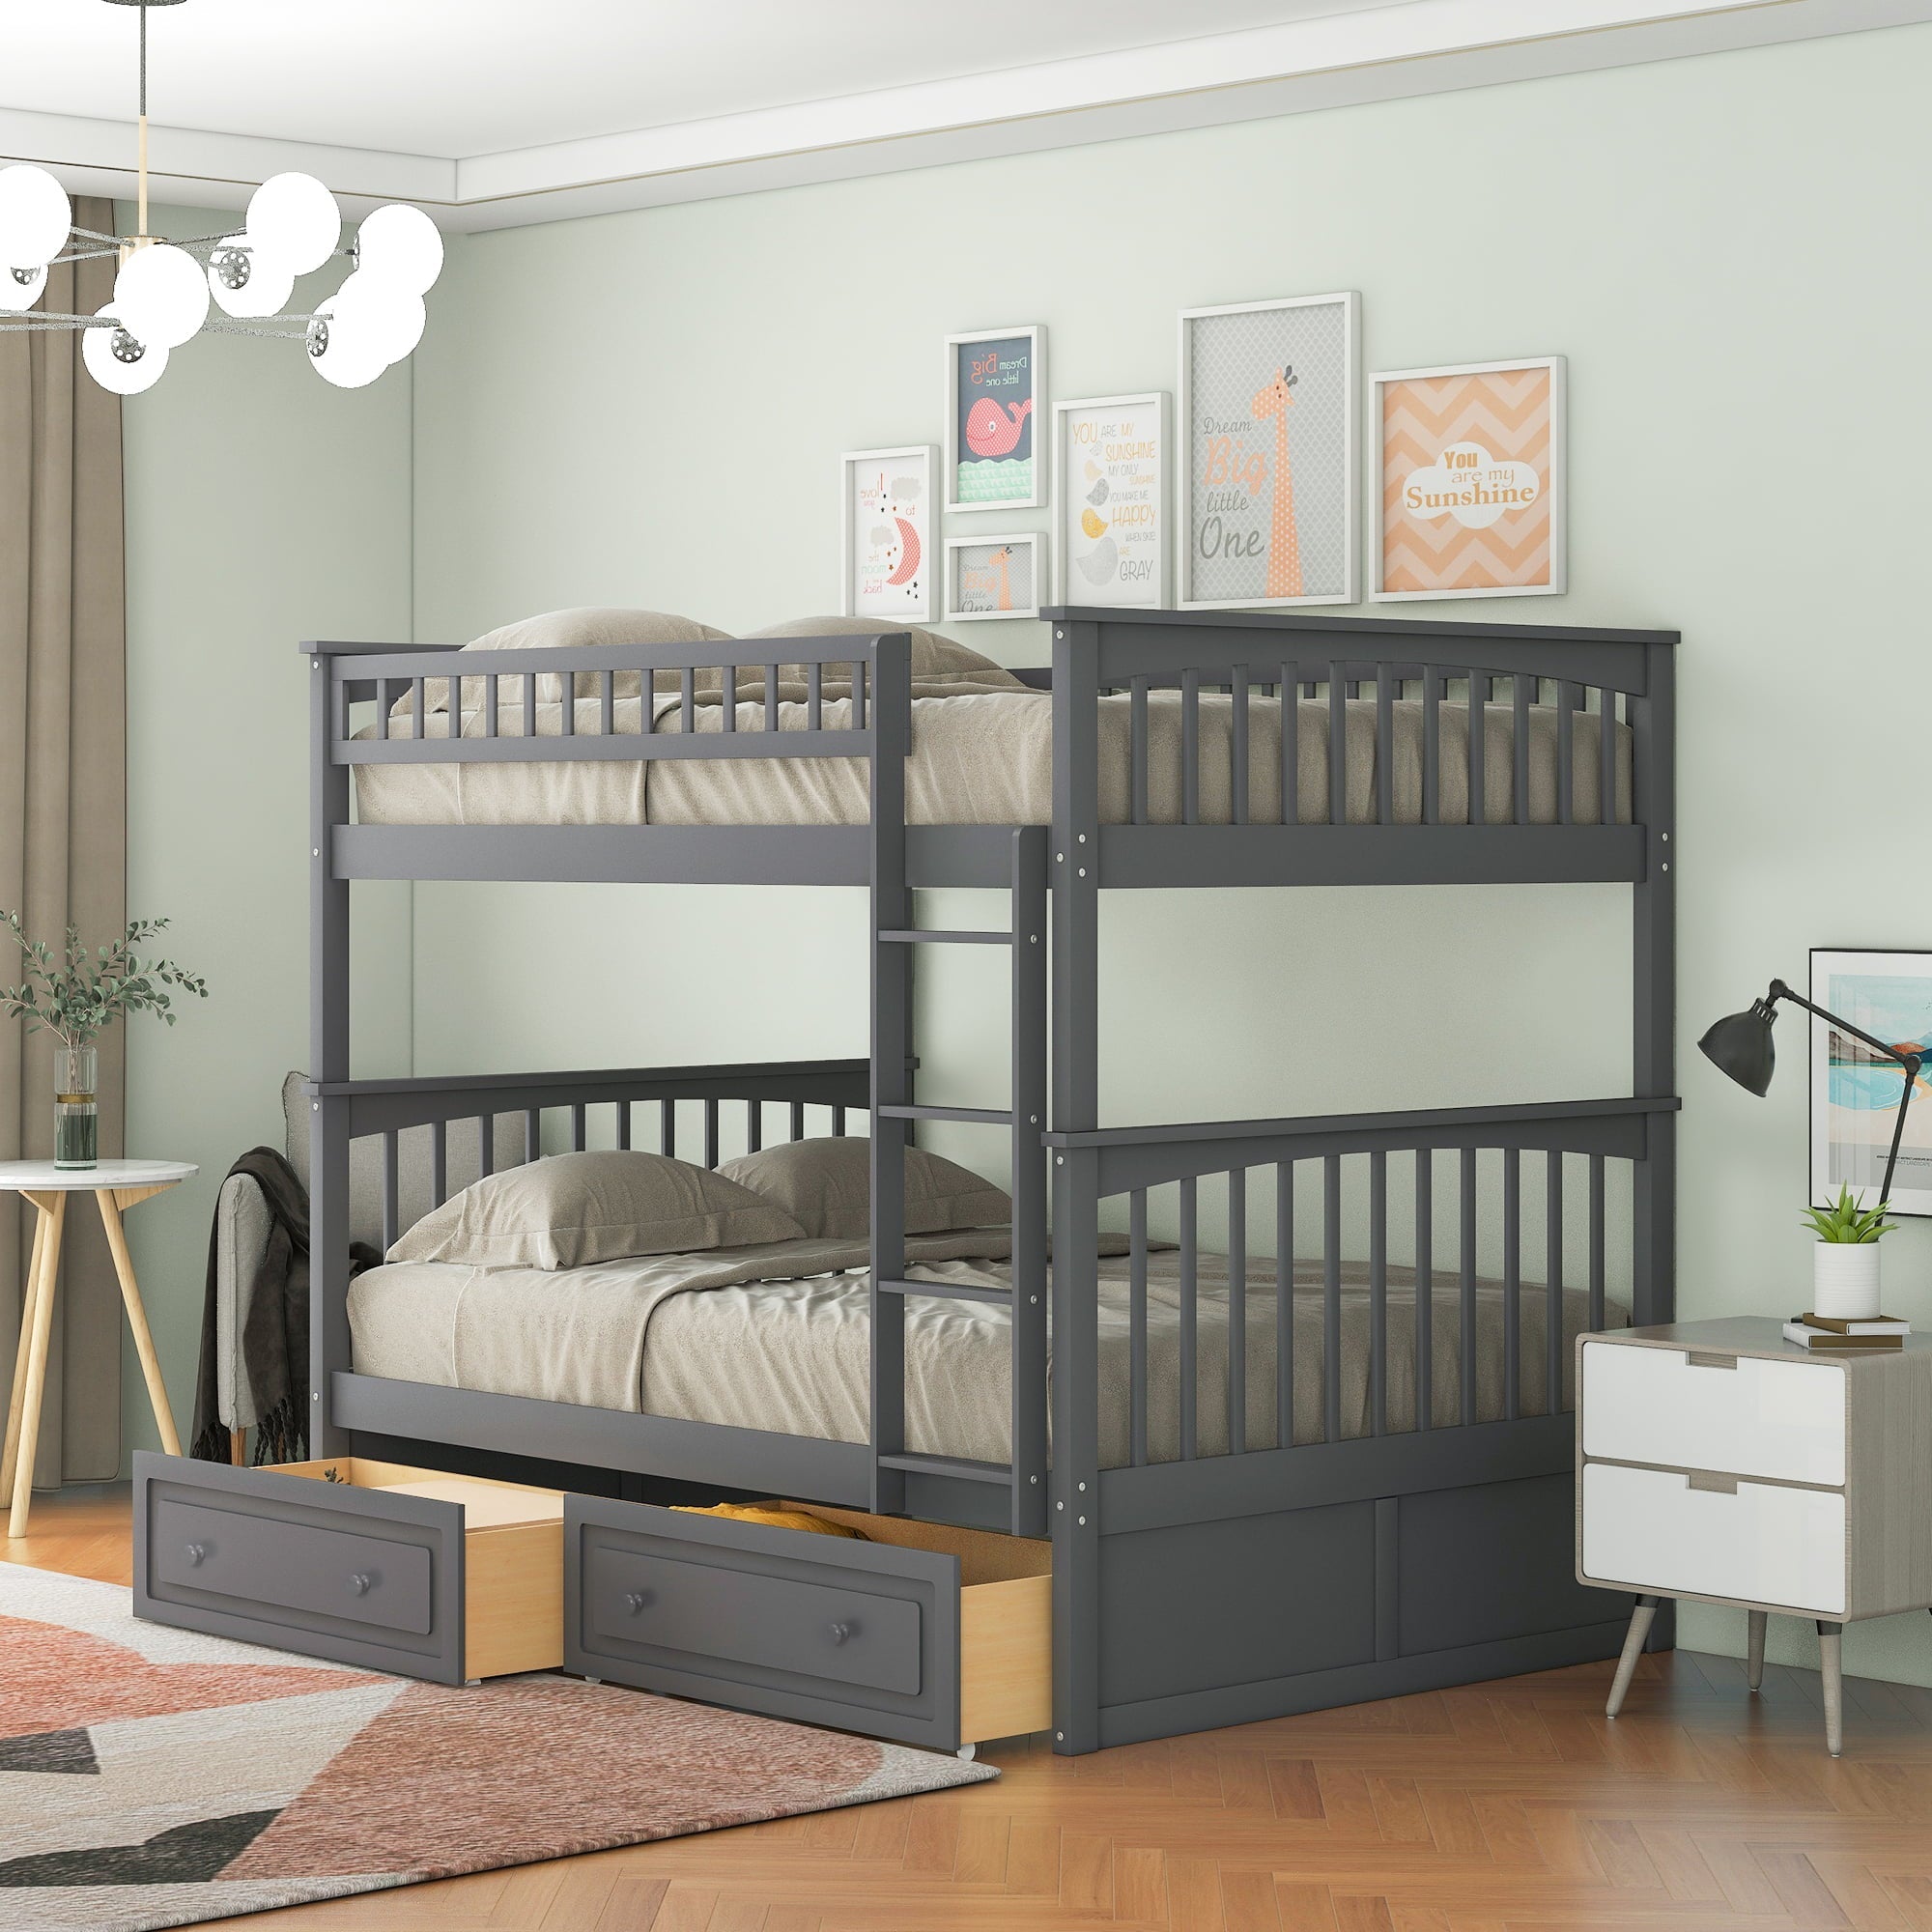 Euroco Pine Wood Bunk Bed With Storage, Full-Over-Full, Grey